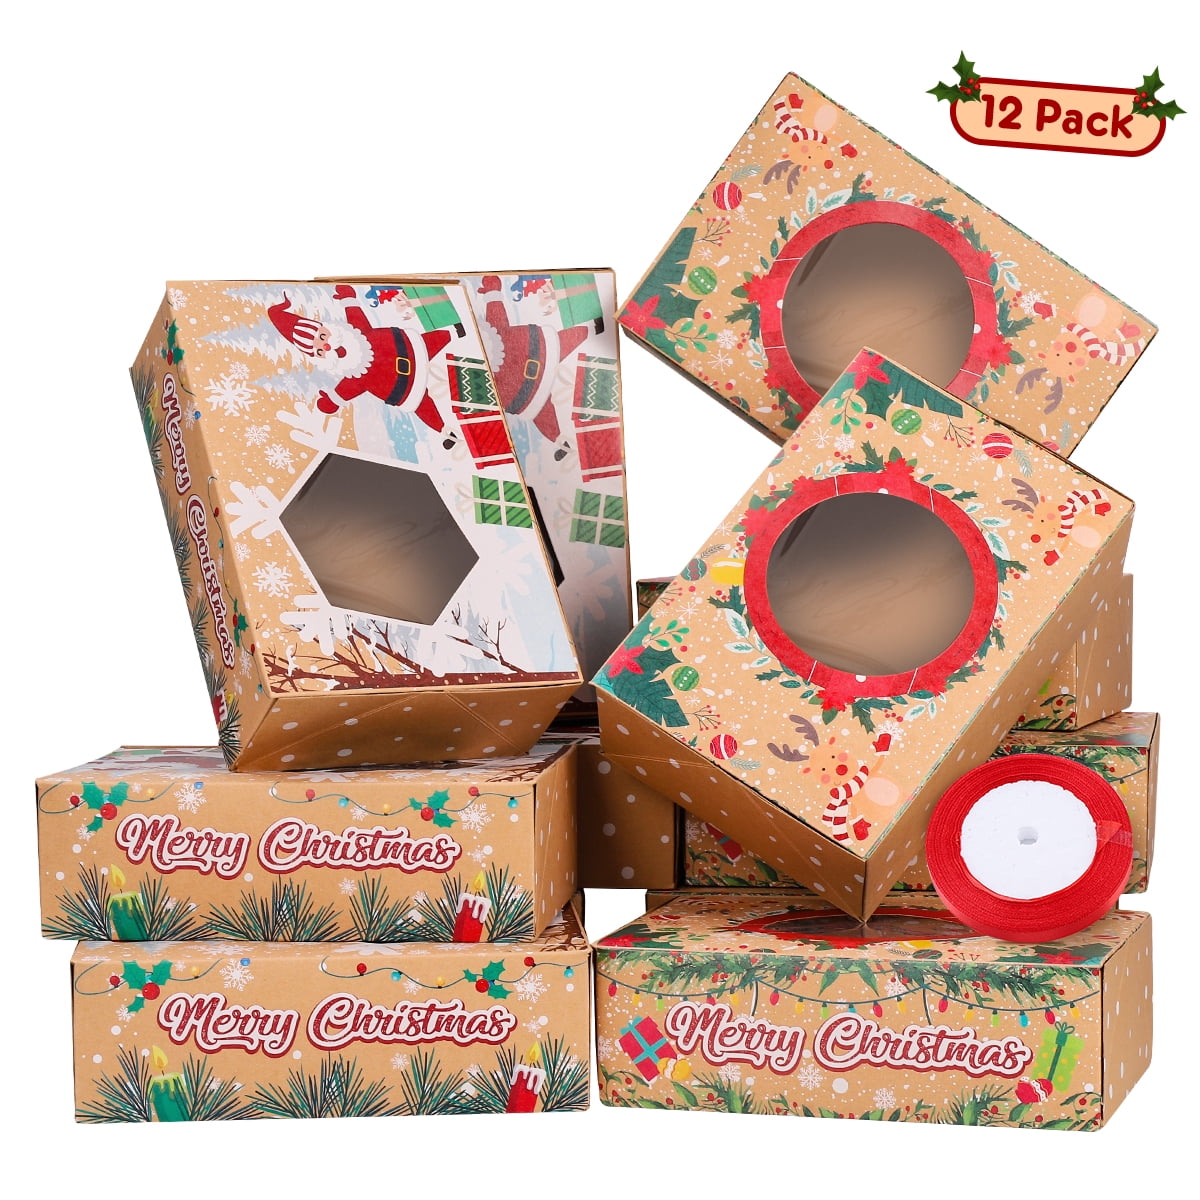 12PCS Set Christmas Candy Cookie Boxes Bakery Gift Boxes Cupcake Muffin Cake Box 